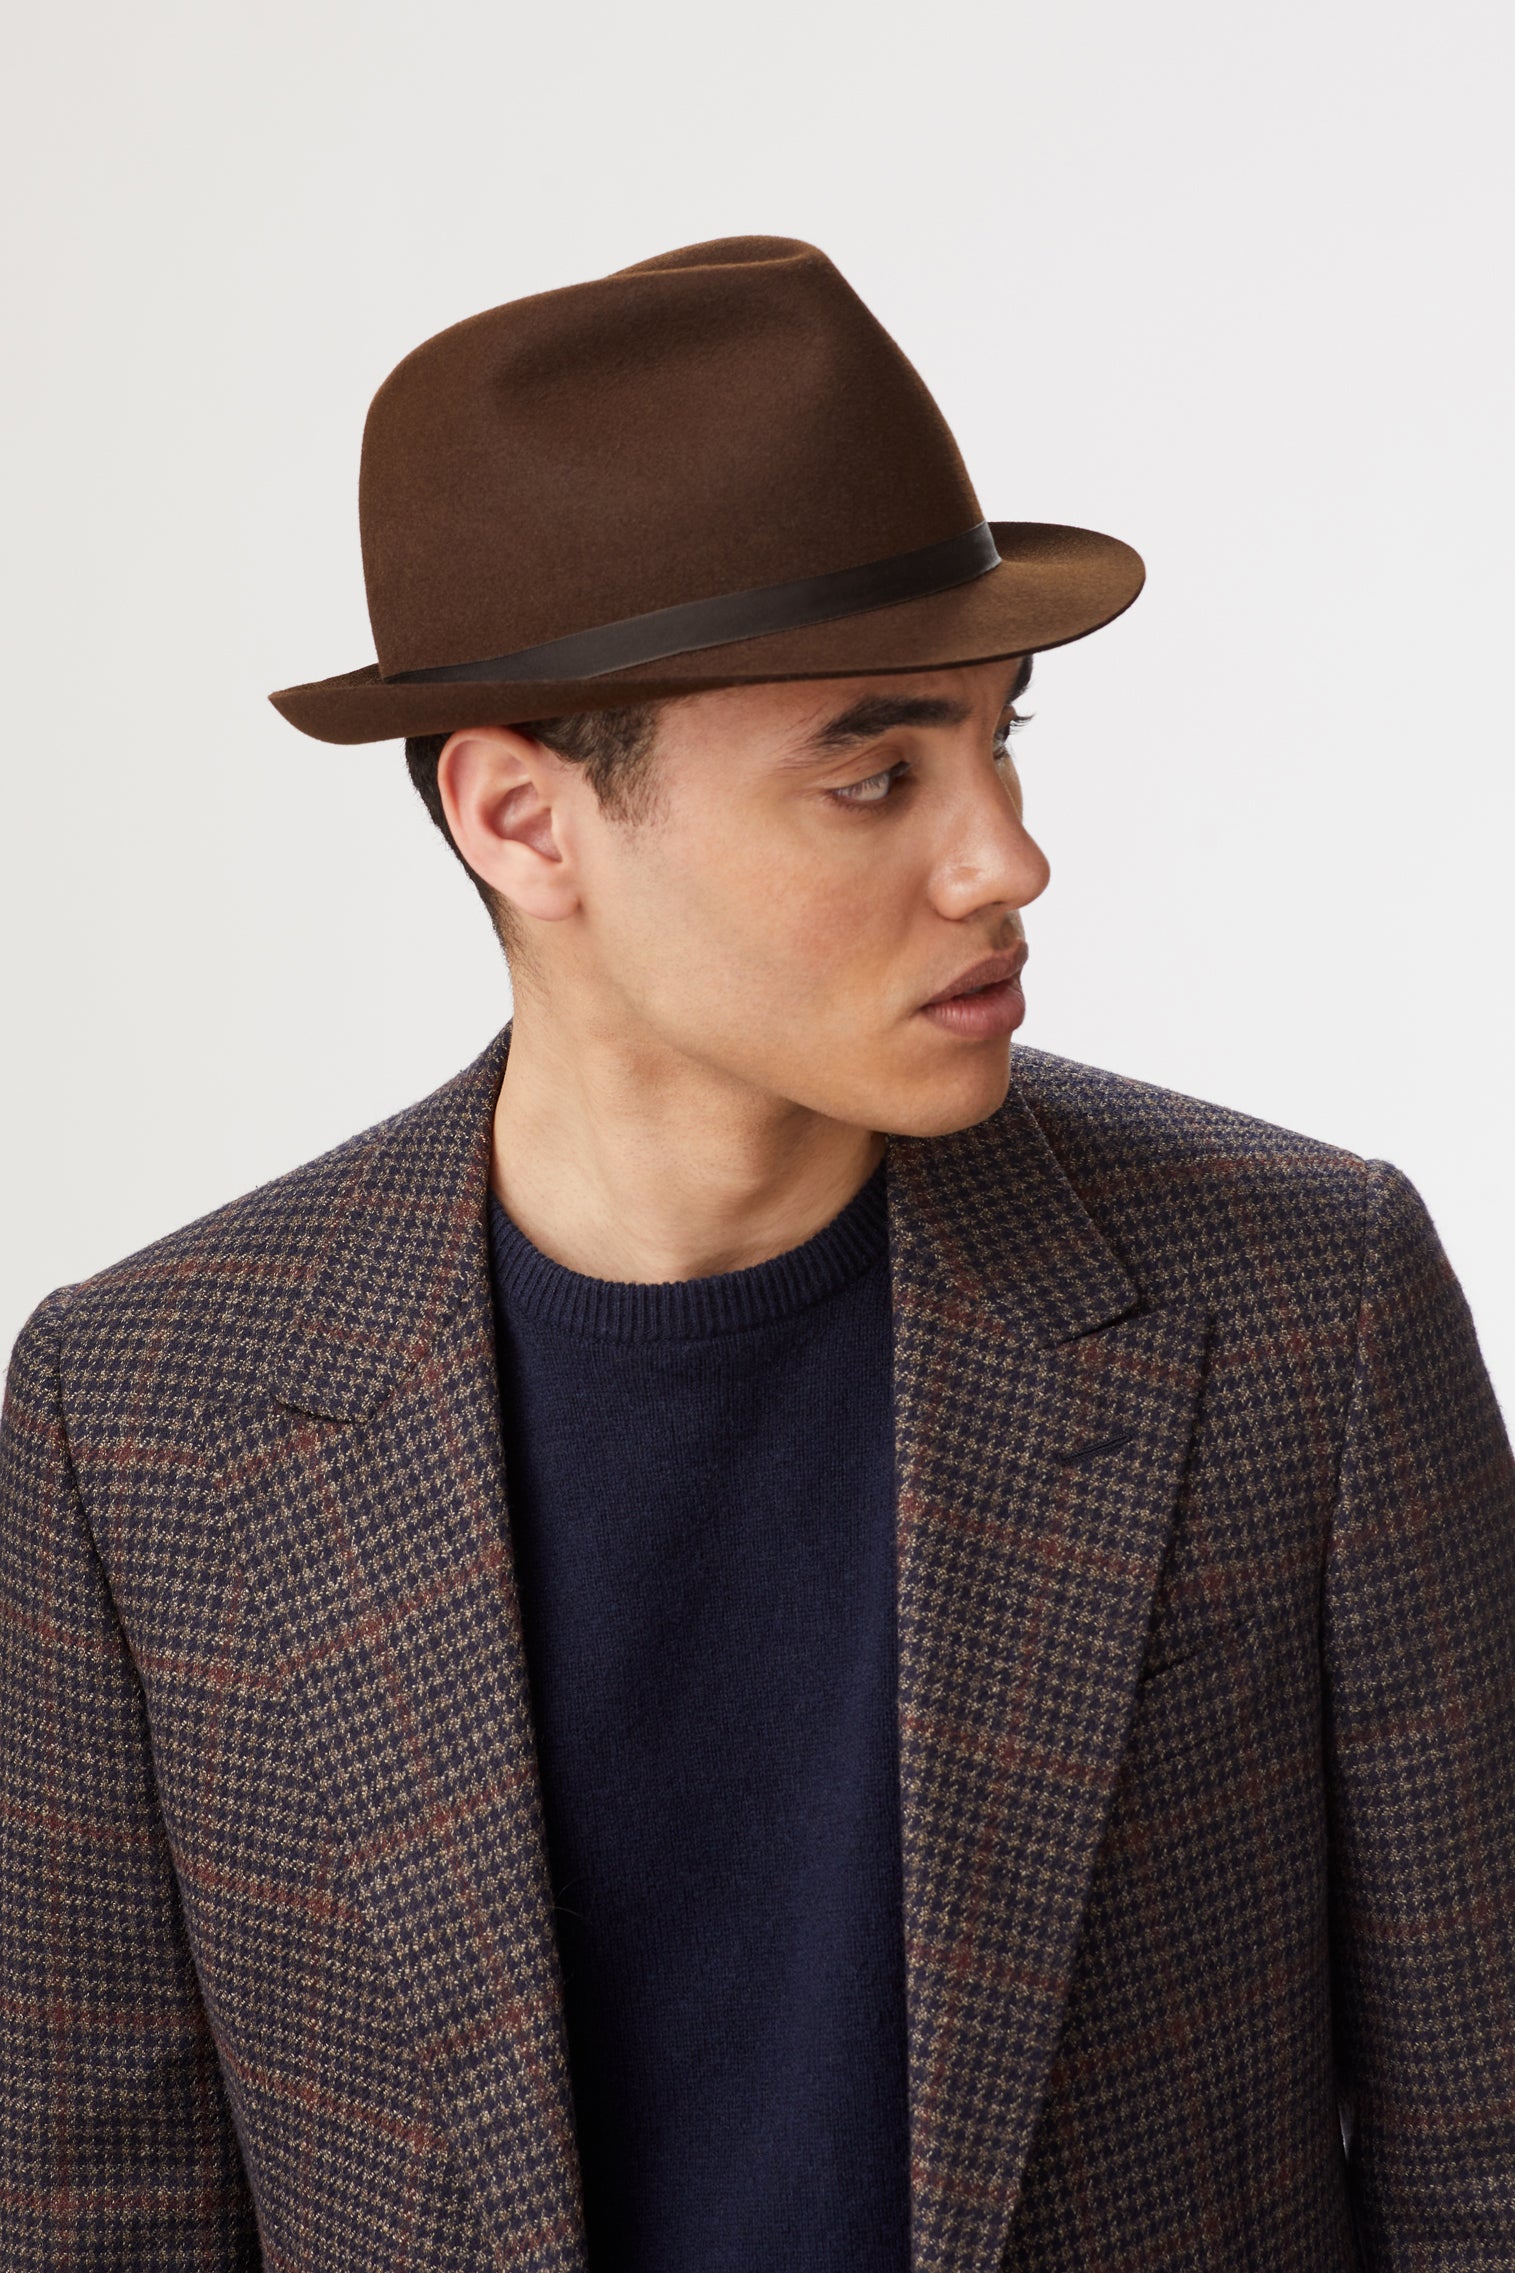 BROWN FELT SNAP-BRIM TRILBY HAT WITH NARROW BROWN GROSGRAIN BAND AND BOW